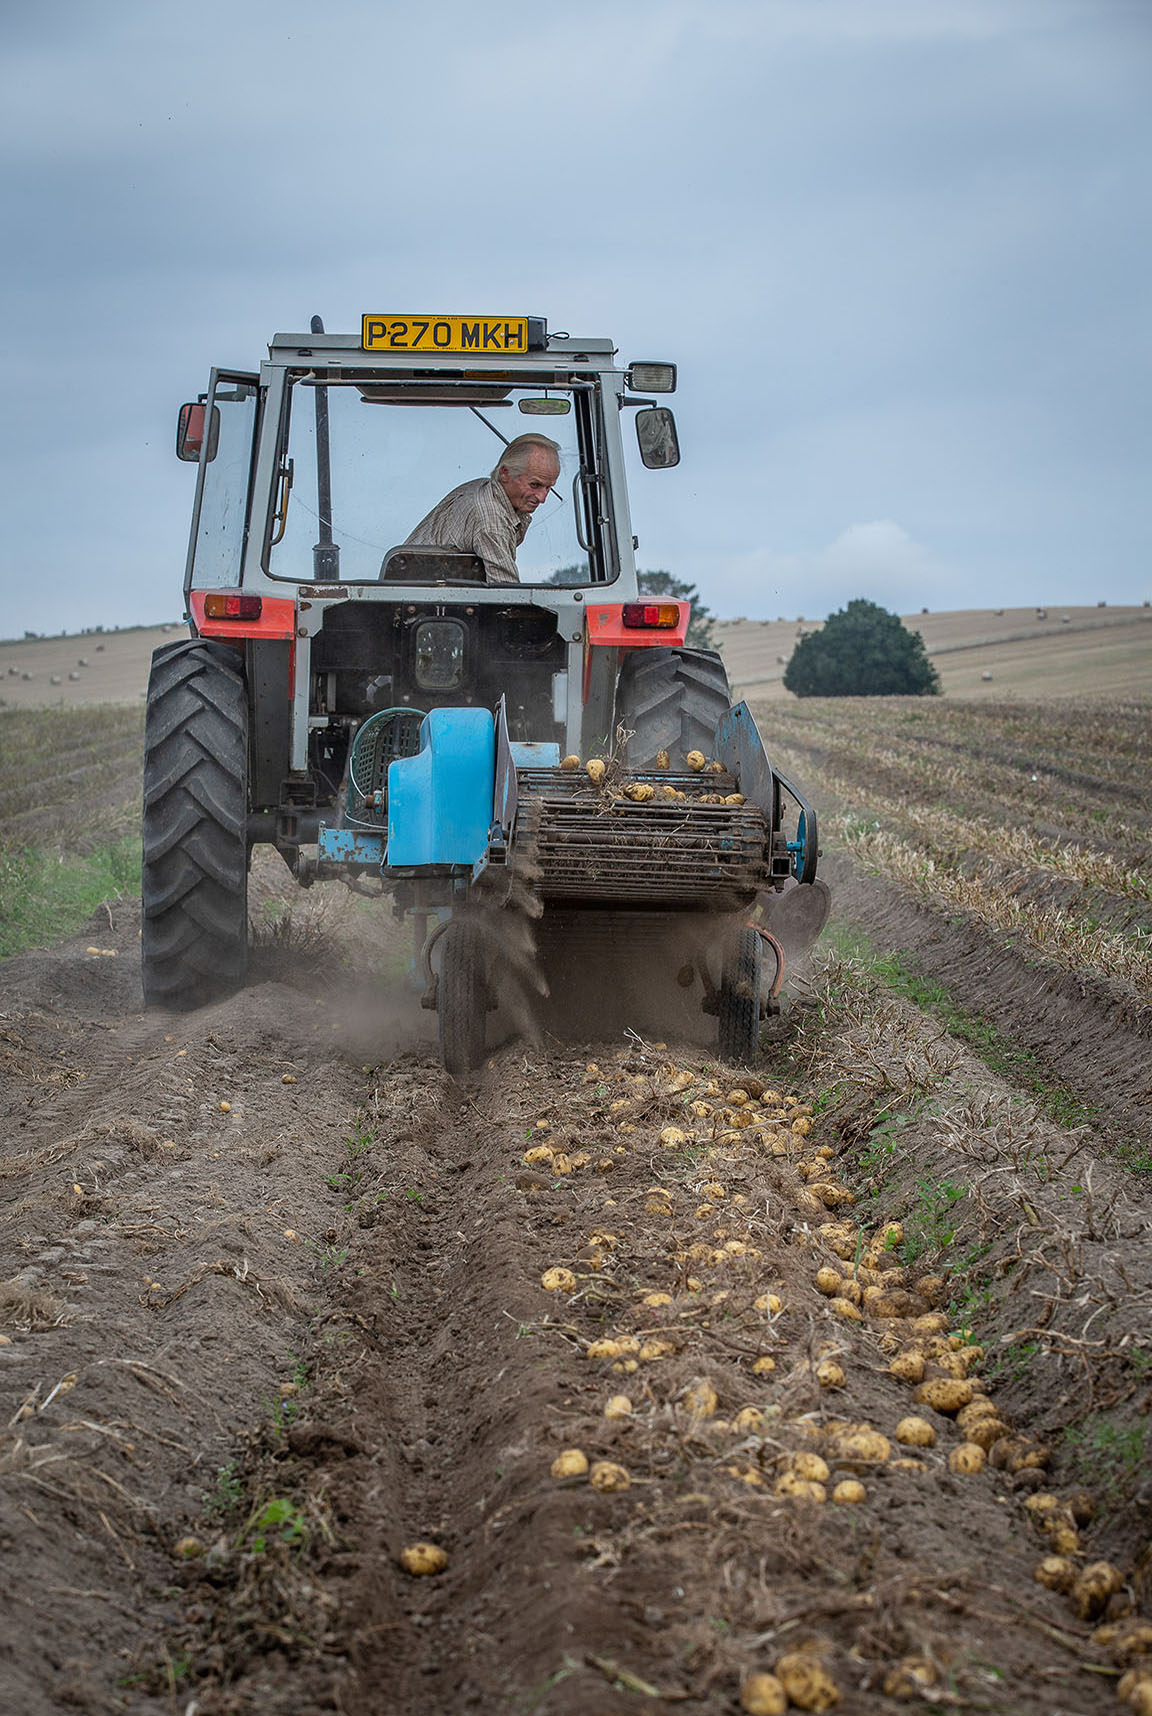 Man collecting potatoes in a tractor by Polly Baldwin